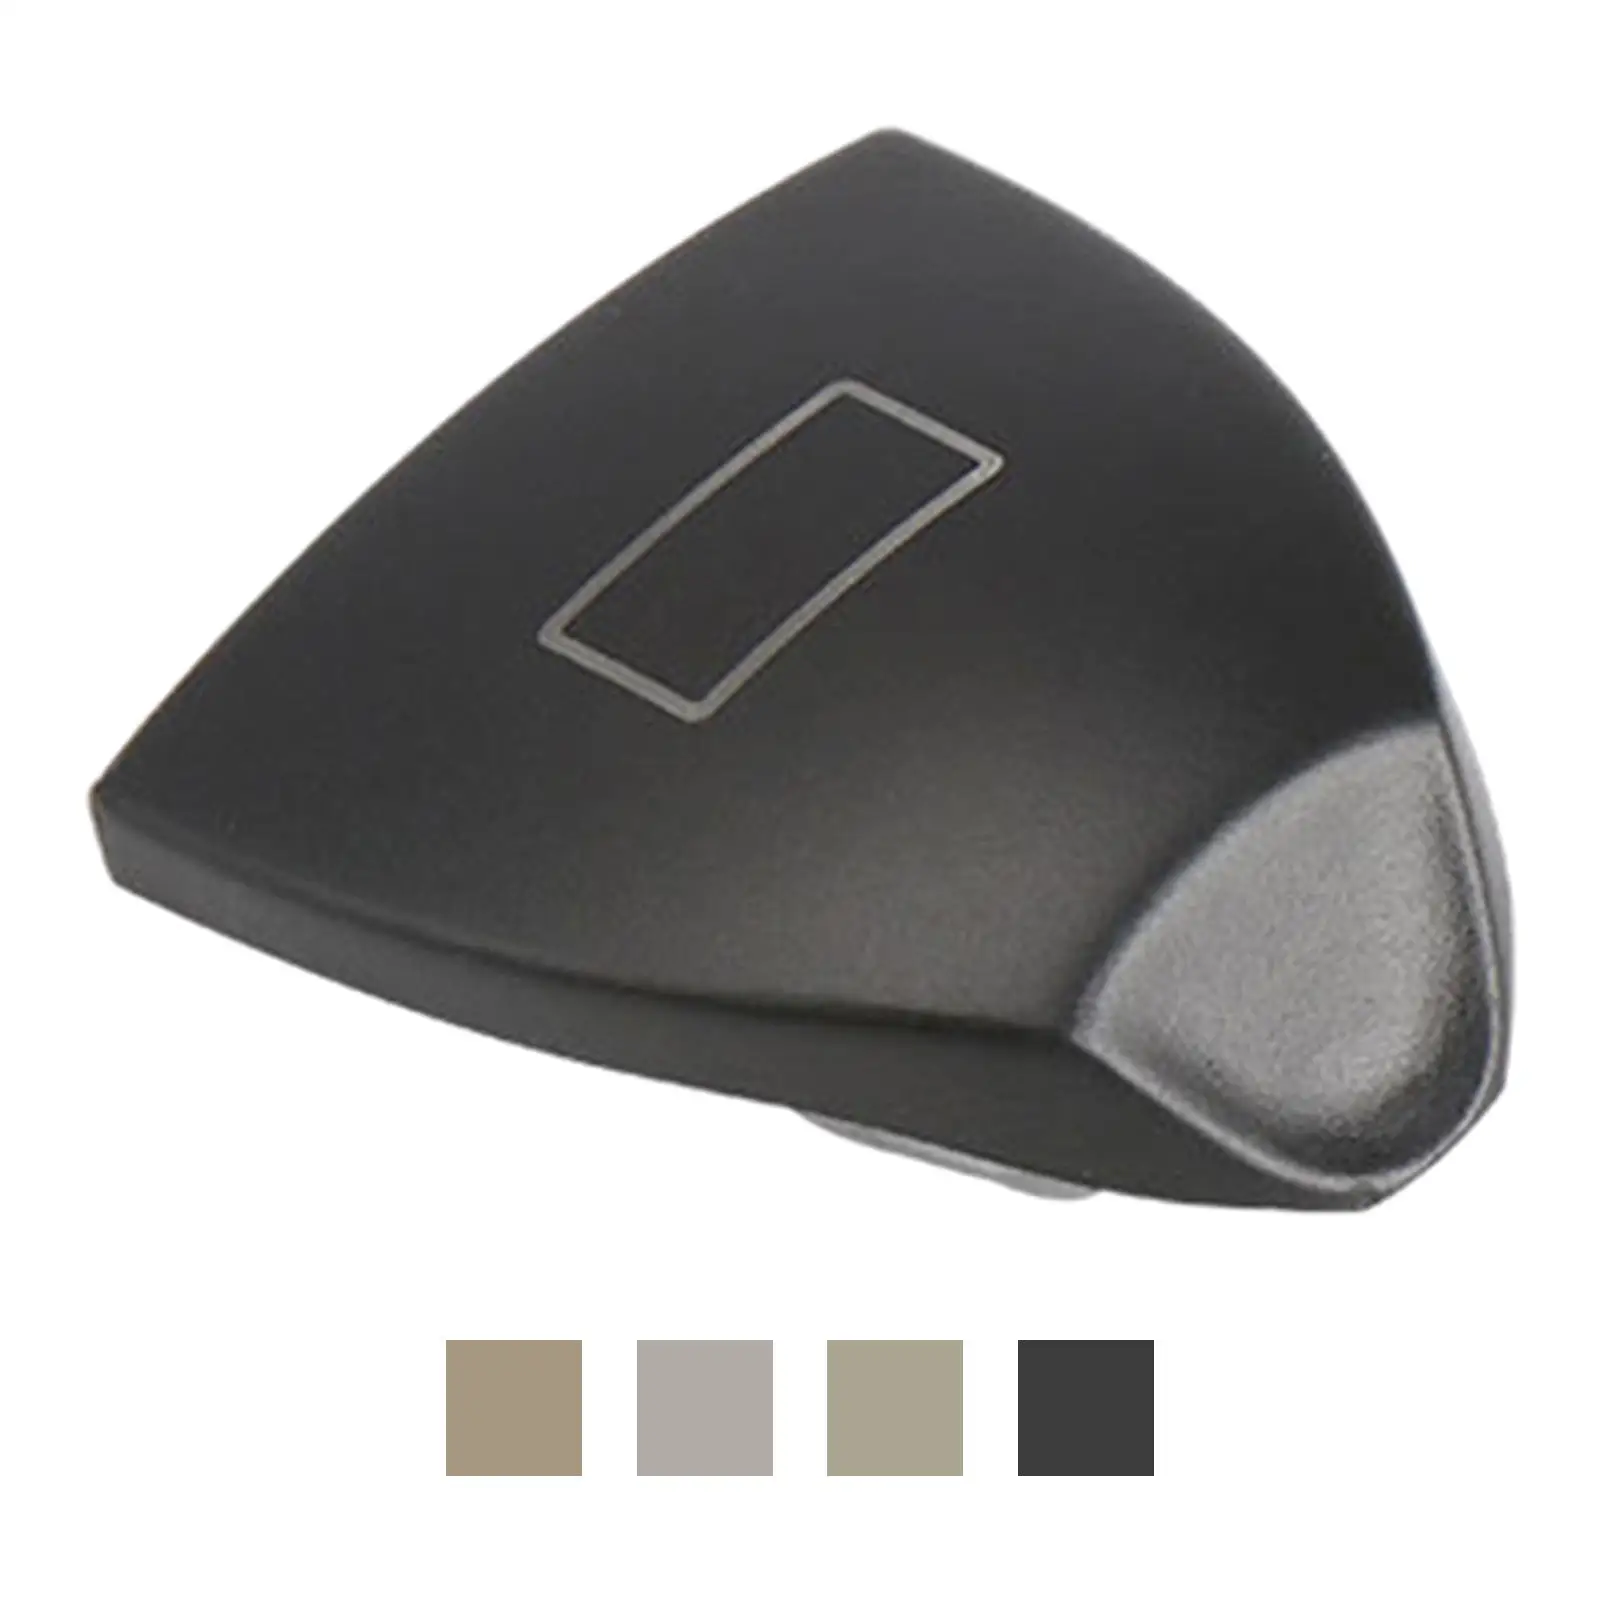 W211 Sunroof Light Switch Button Power Window Replace Parts Interior Switches Interior Accessory Car Fit for Benz E-Class 03-08